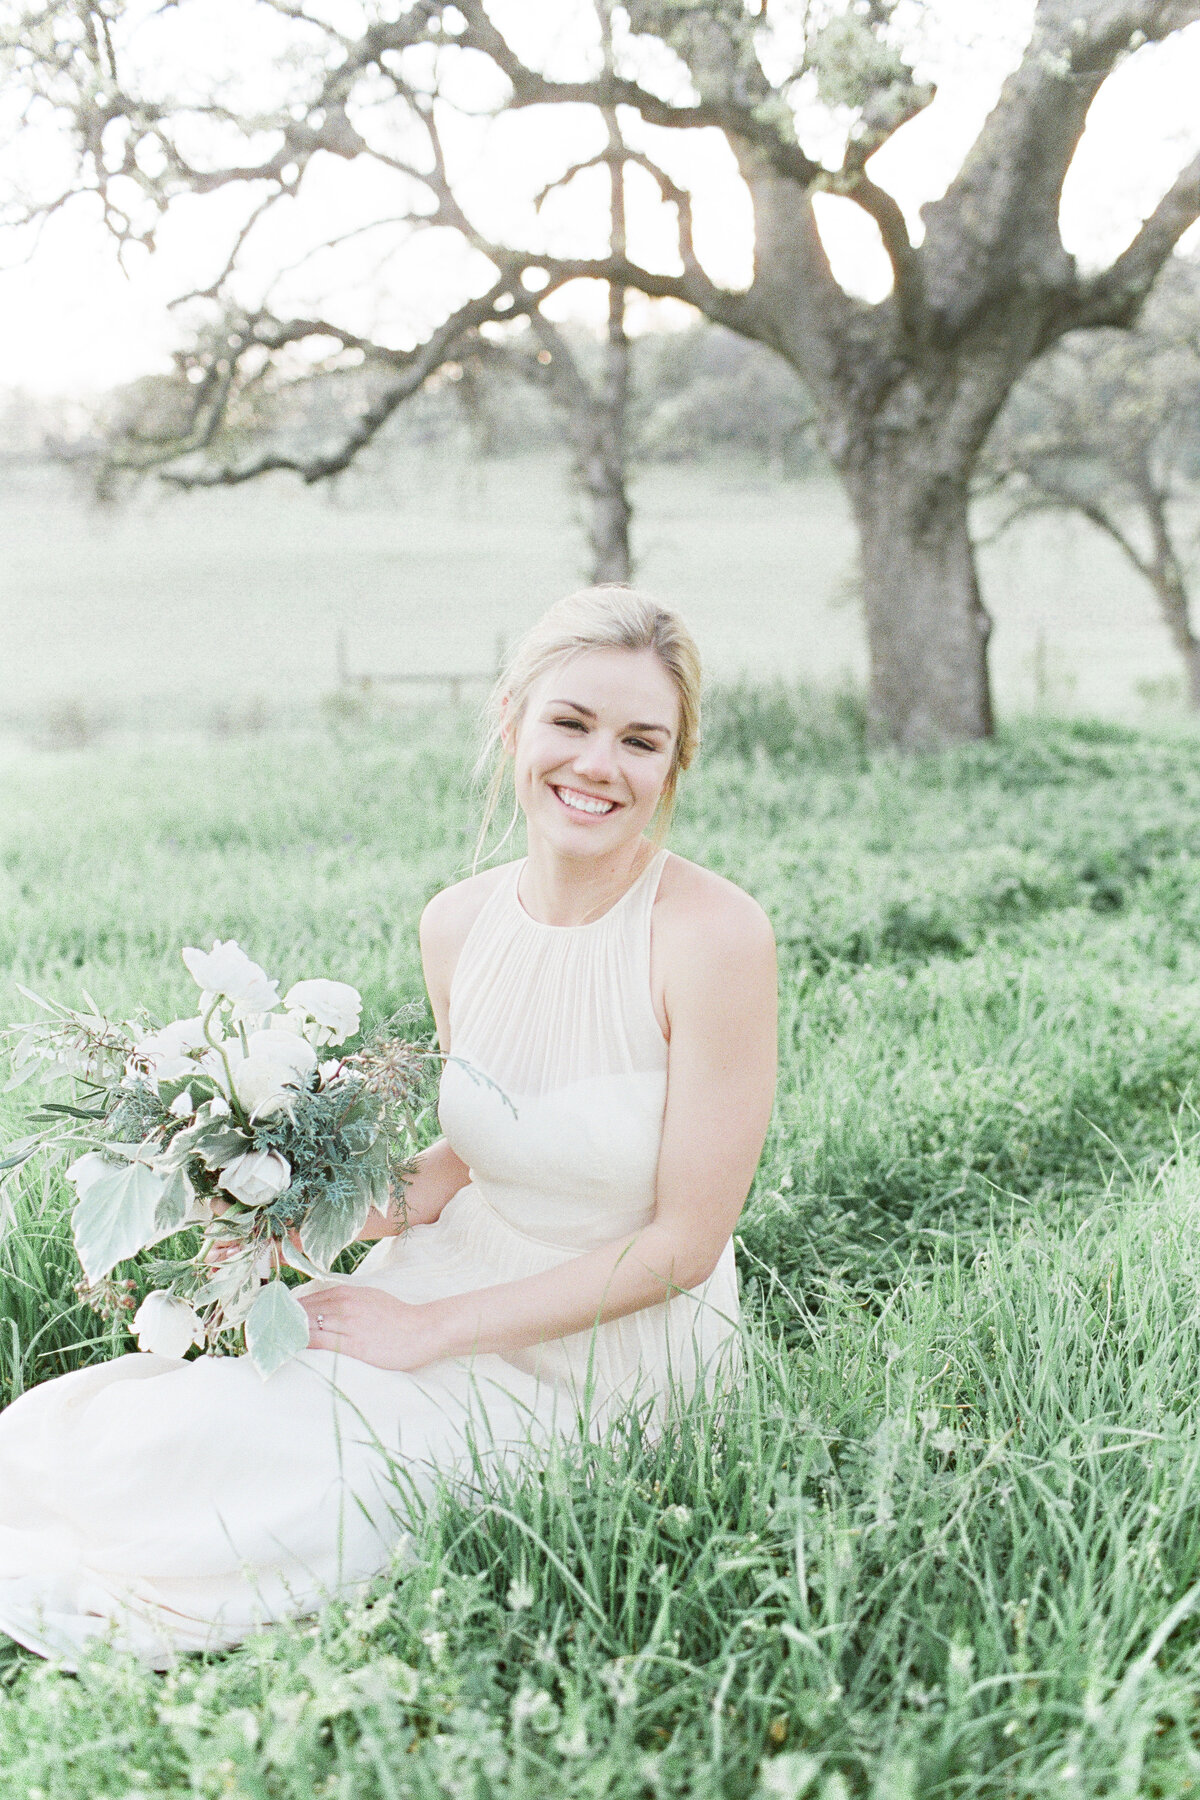 Bride holding flowers while sitting in grass and looking up